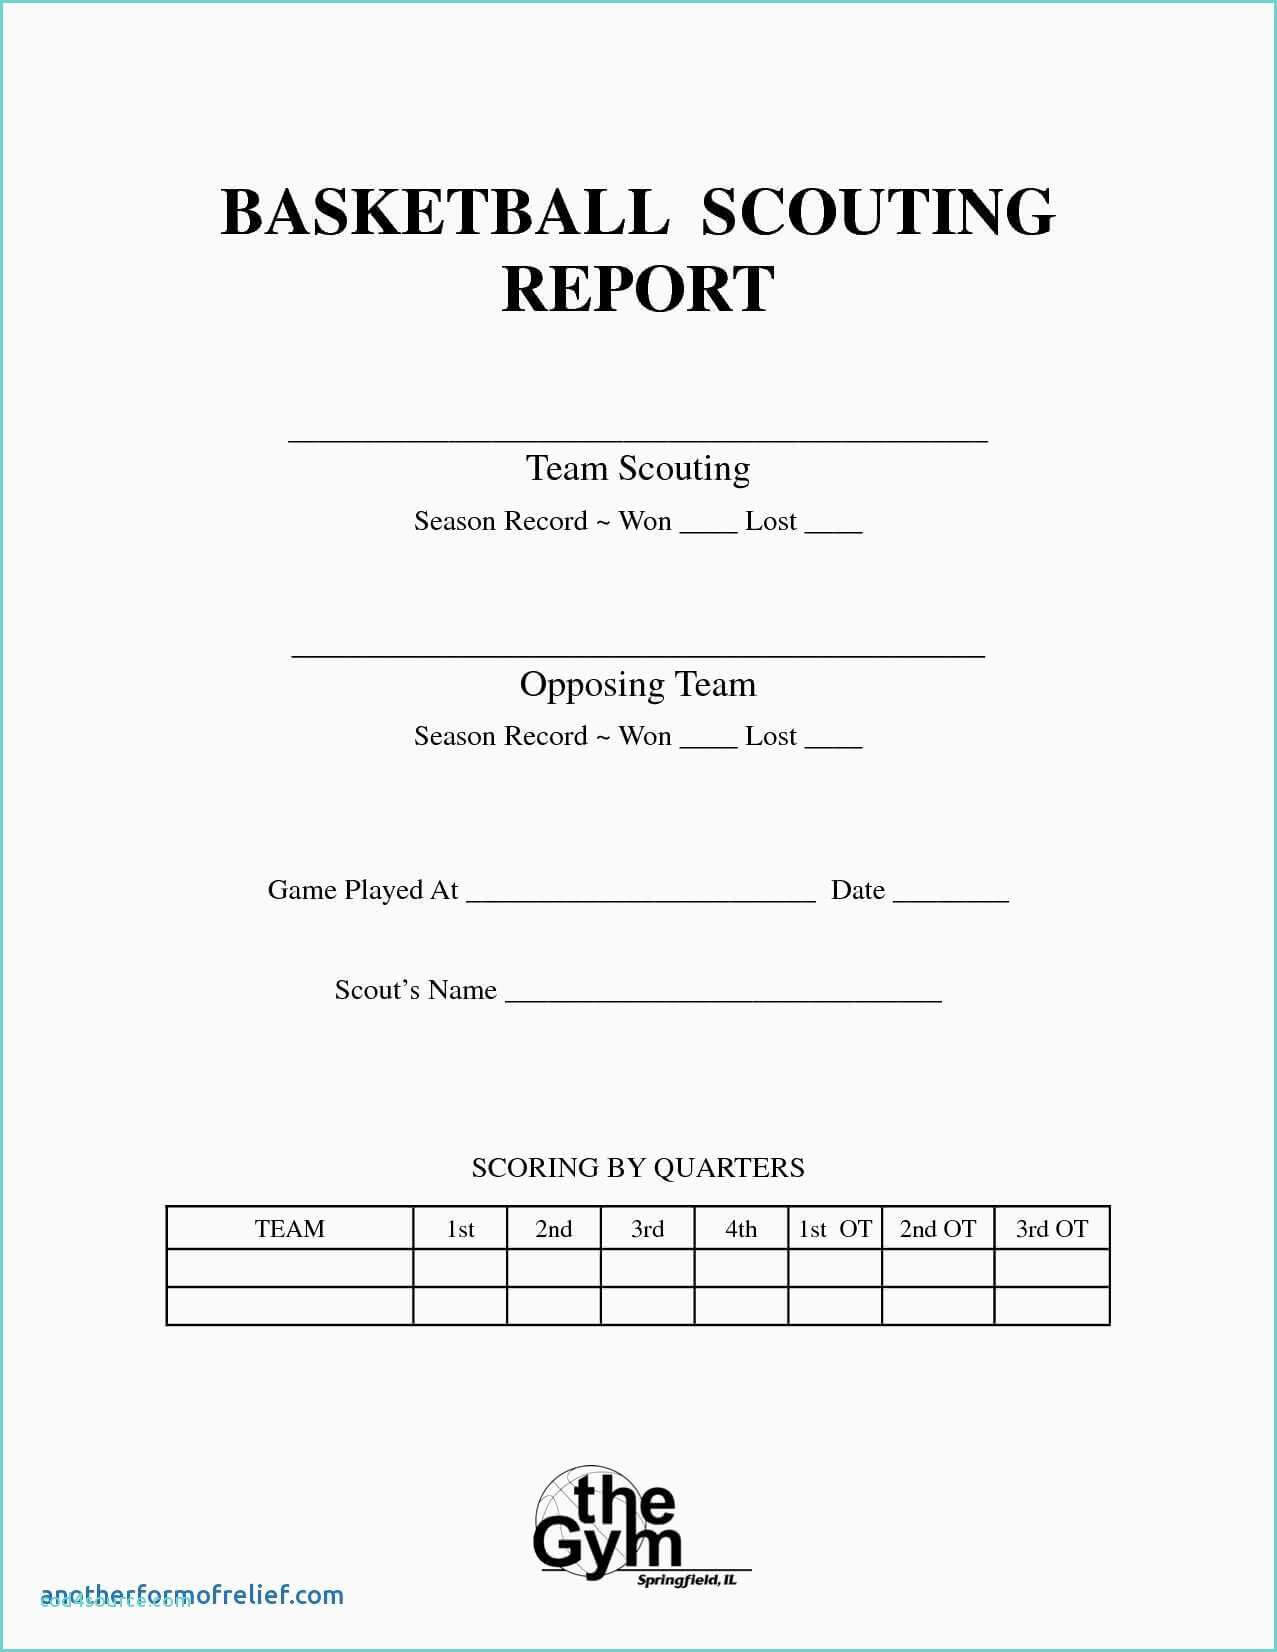 Report Examples College Basketball Scouting Template Team Pertaining To Basketball Scouting Report Template